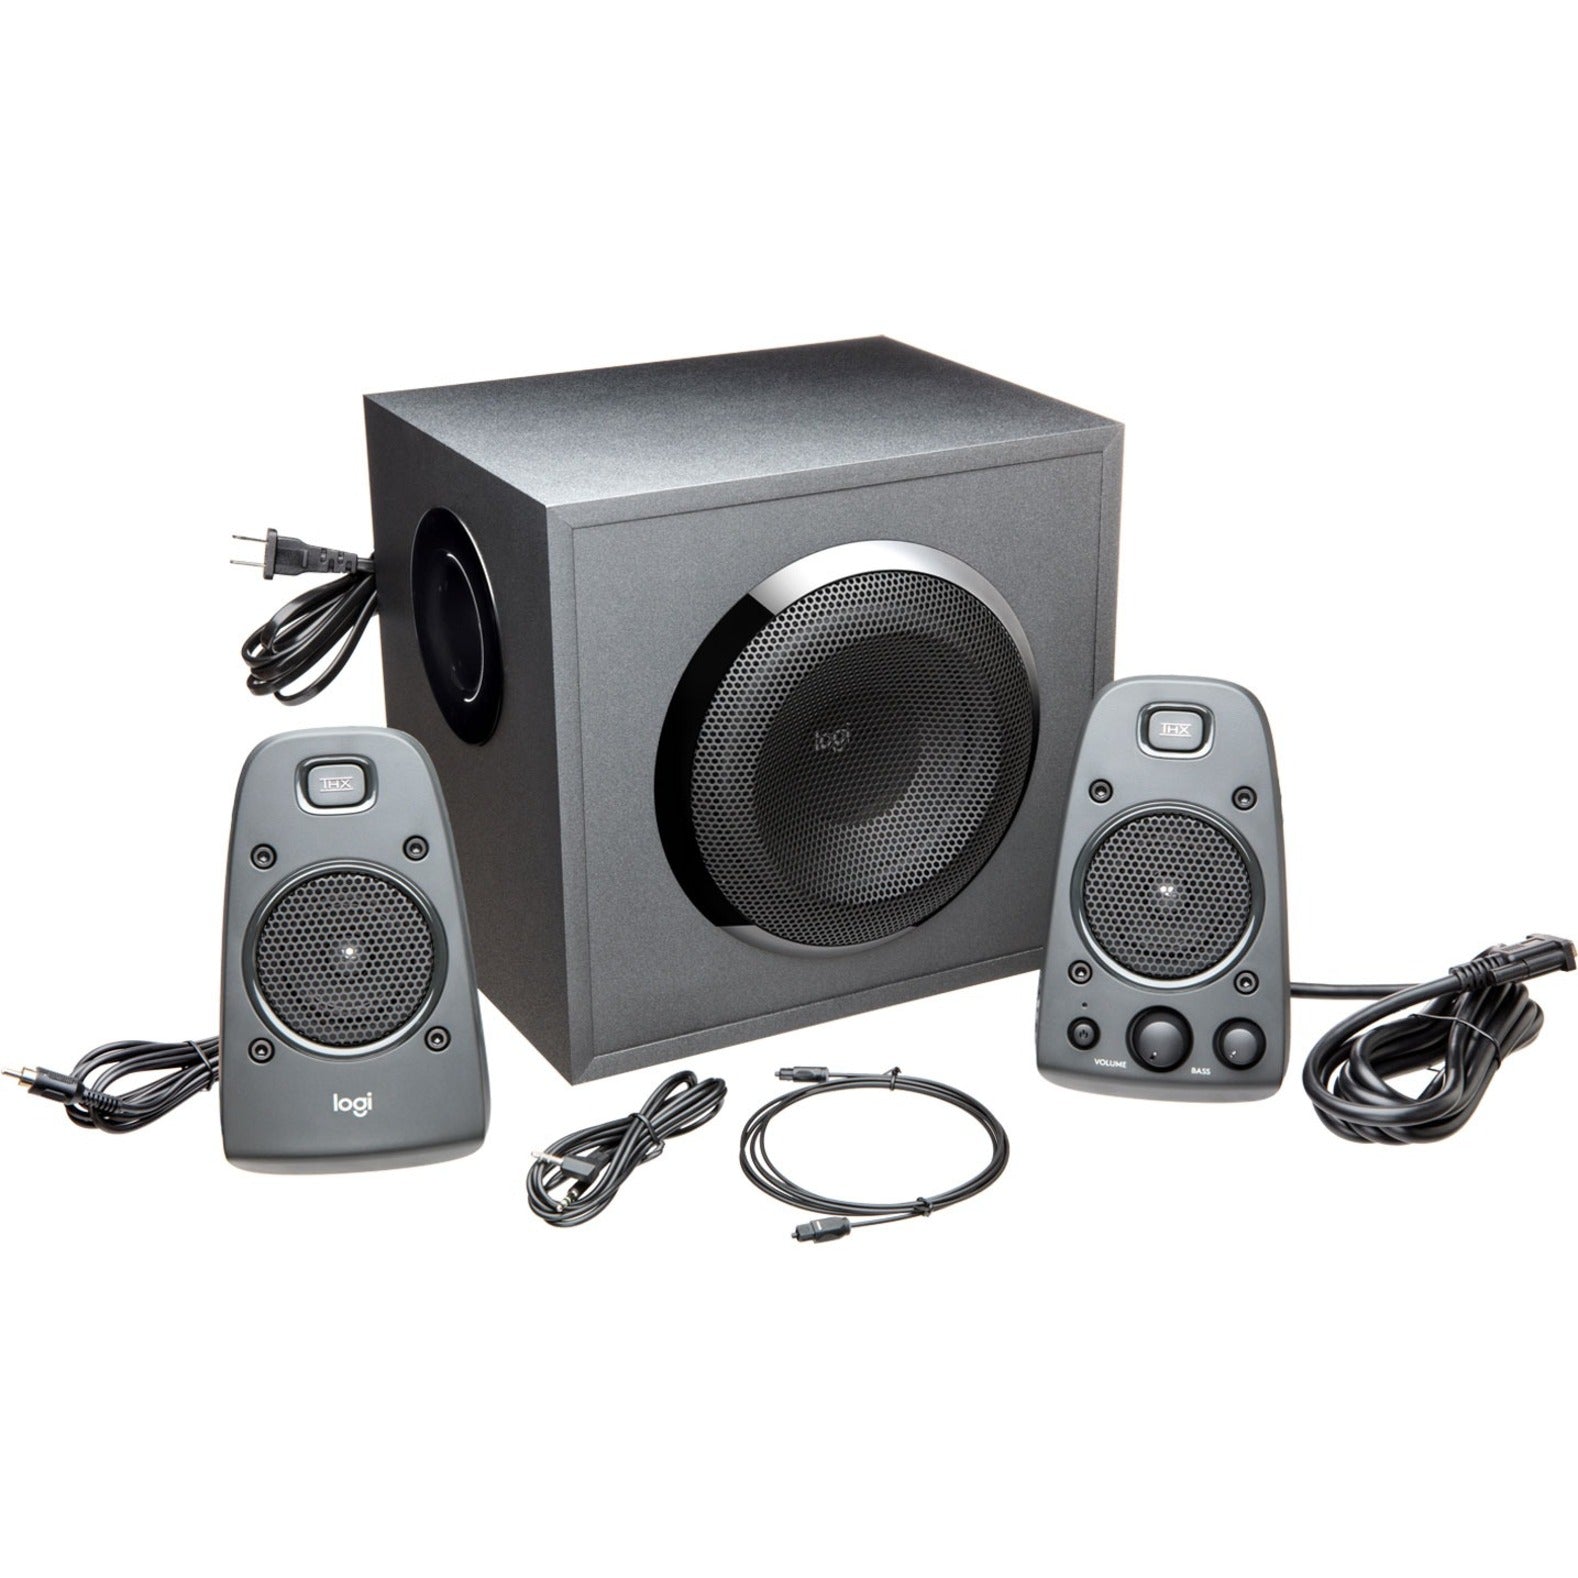 Logitech 980-001258 Z625 Speaker System with Subwoofer and Optical Input, 200 W RMS, Black